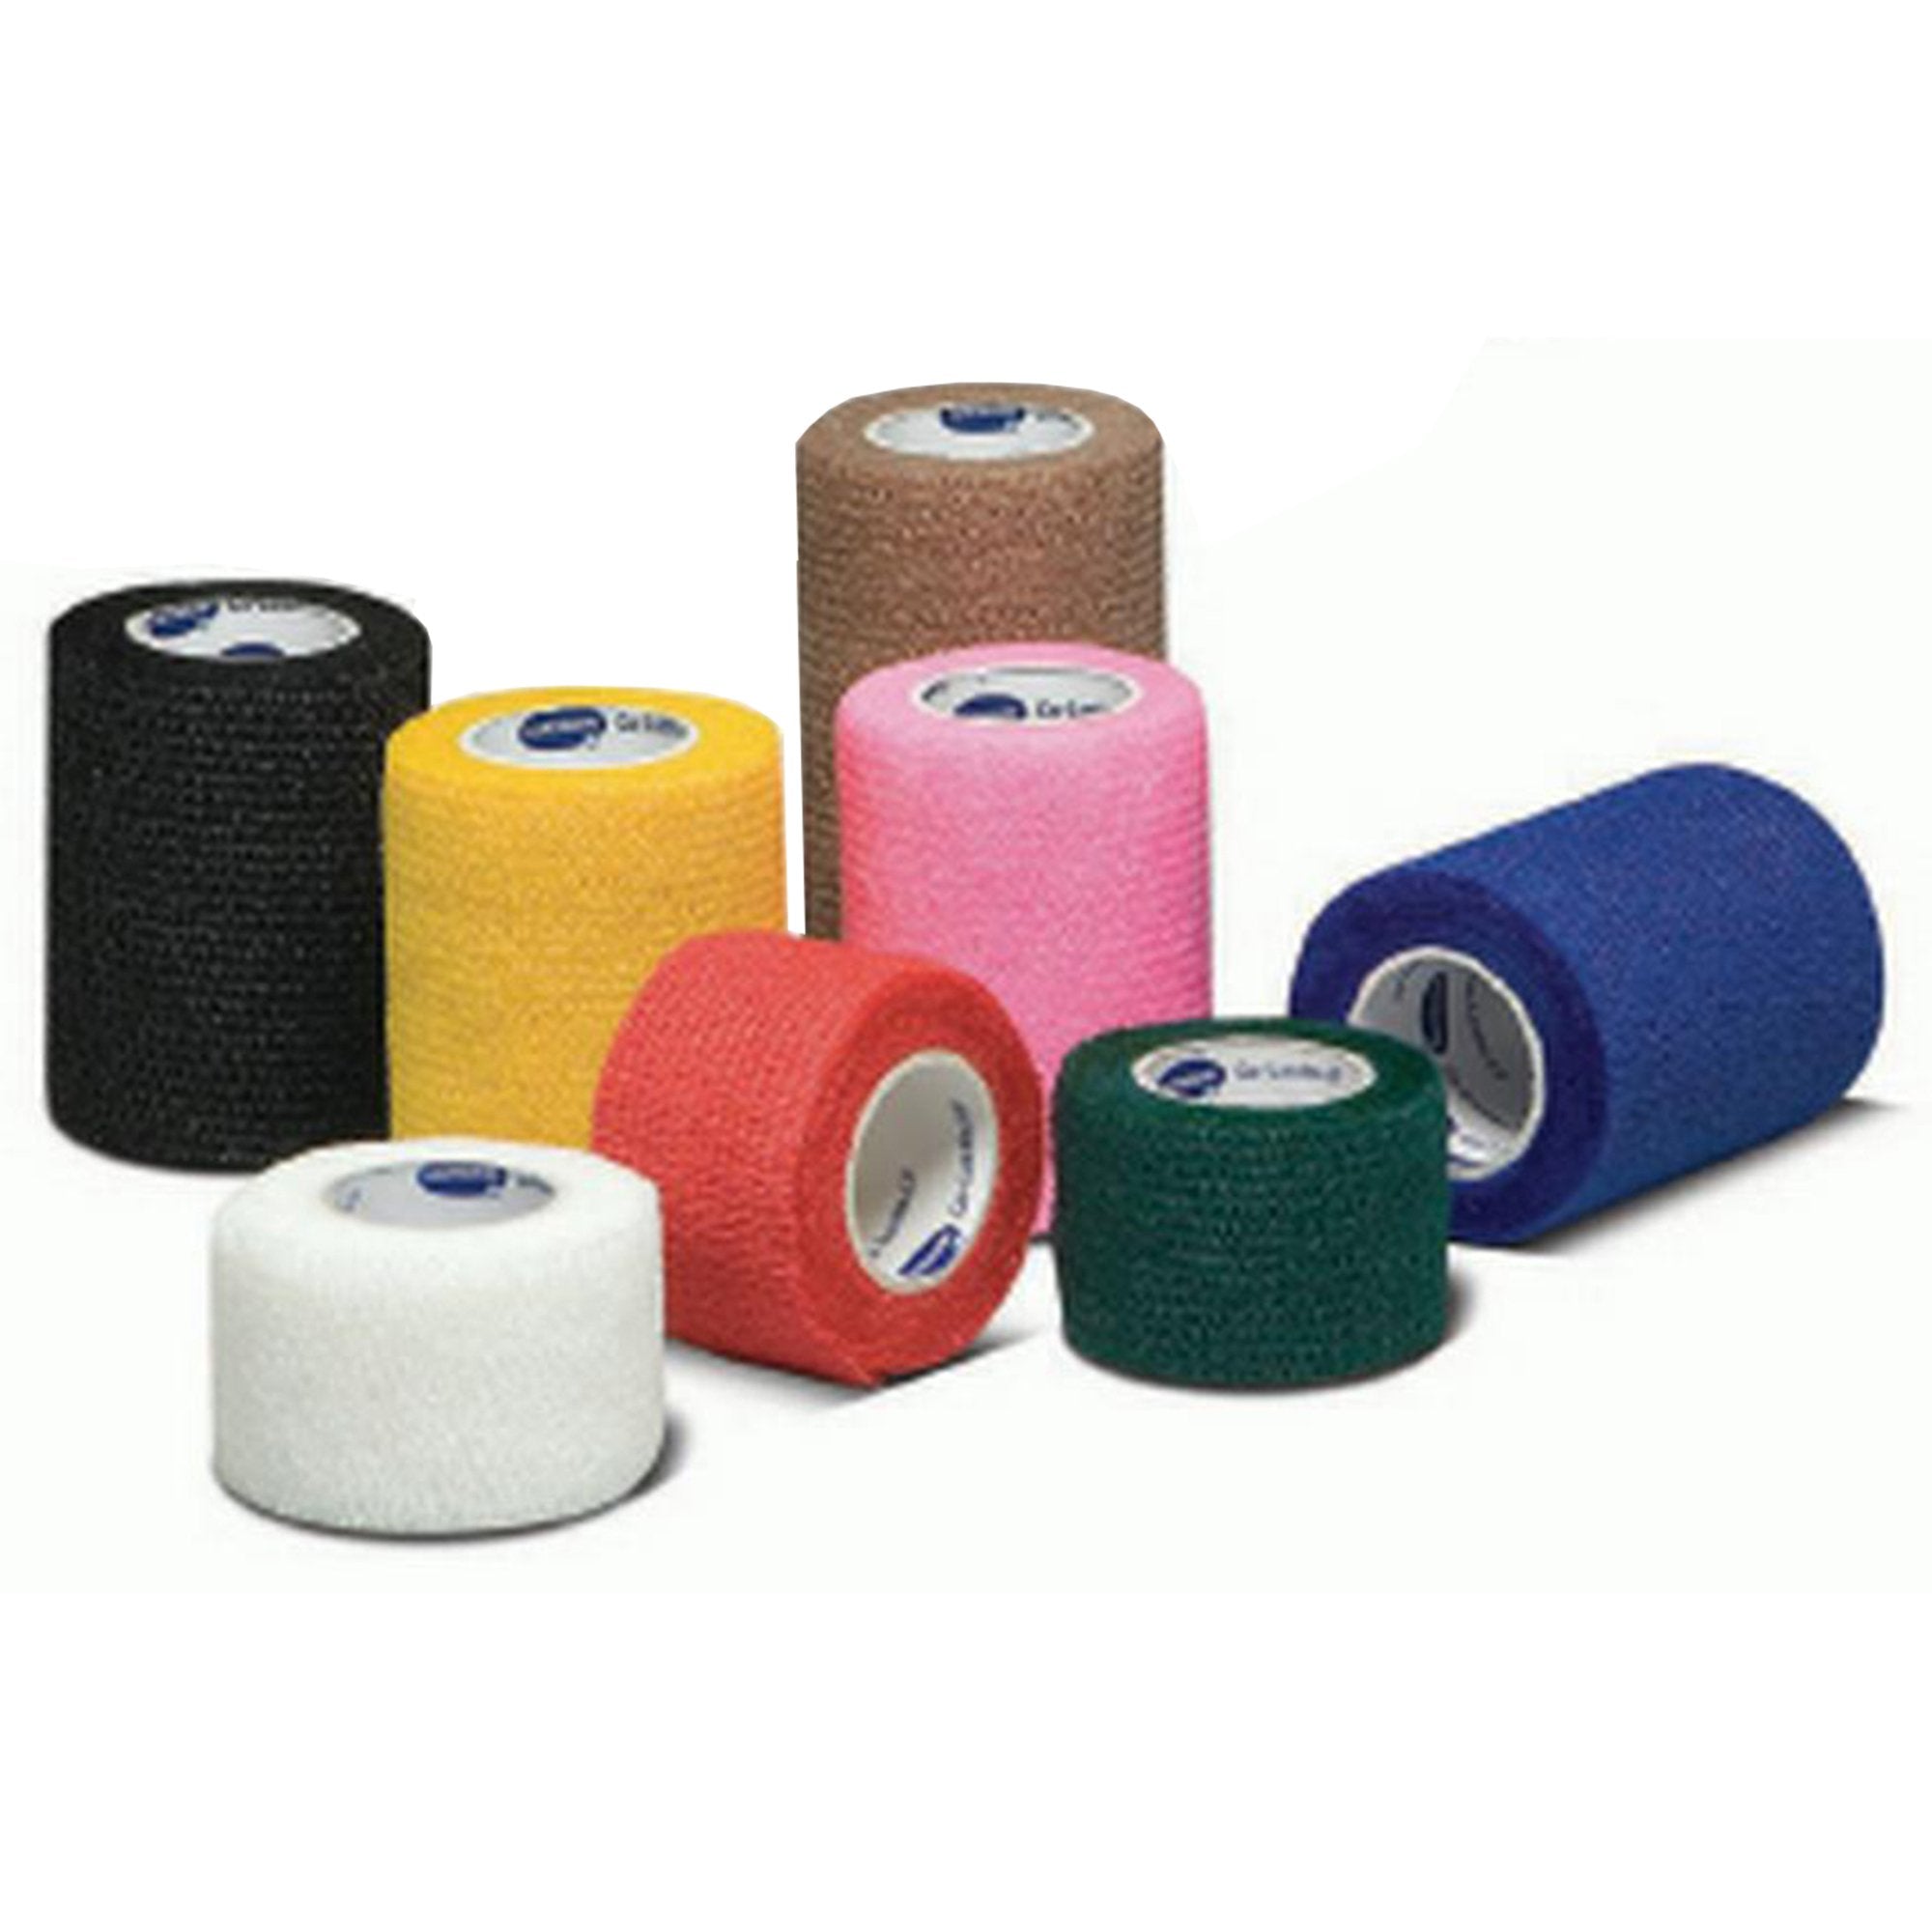 Cohesive Bandage Co-Lastic® 2 Inch X 5 Yard Self-Adherent Closure Assorted Colors NonSterile Standard Compression